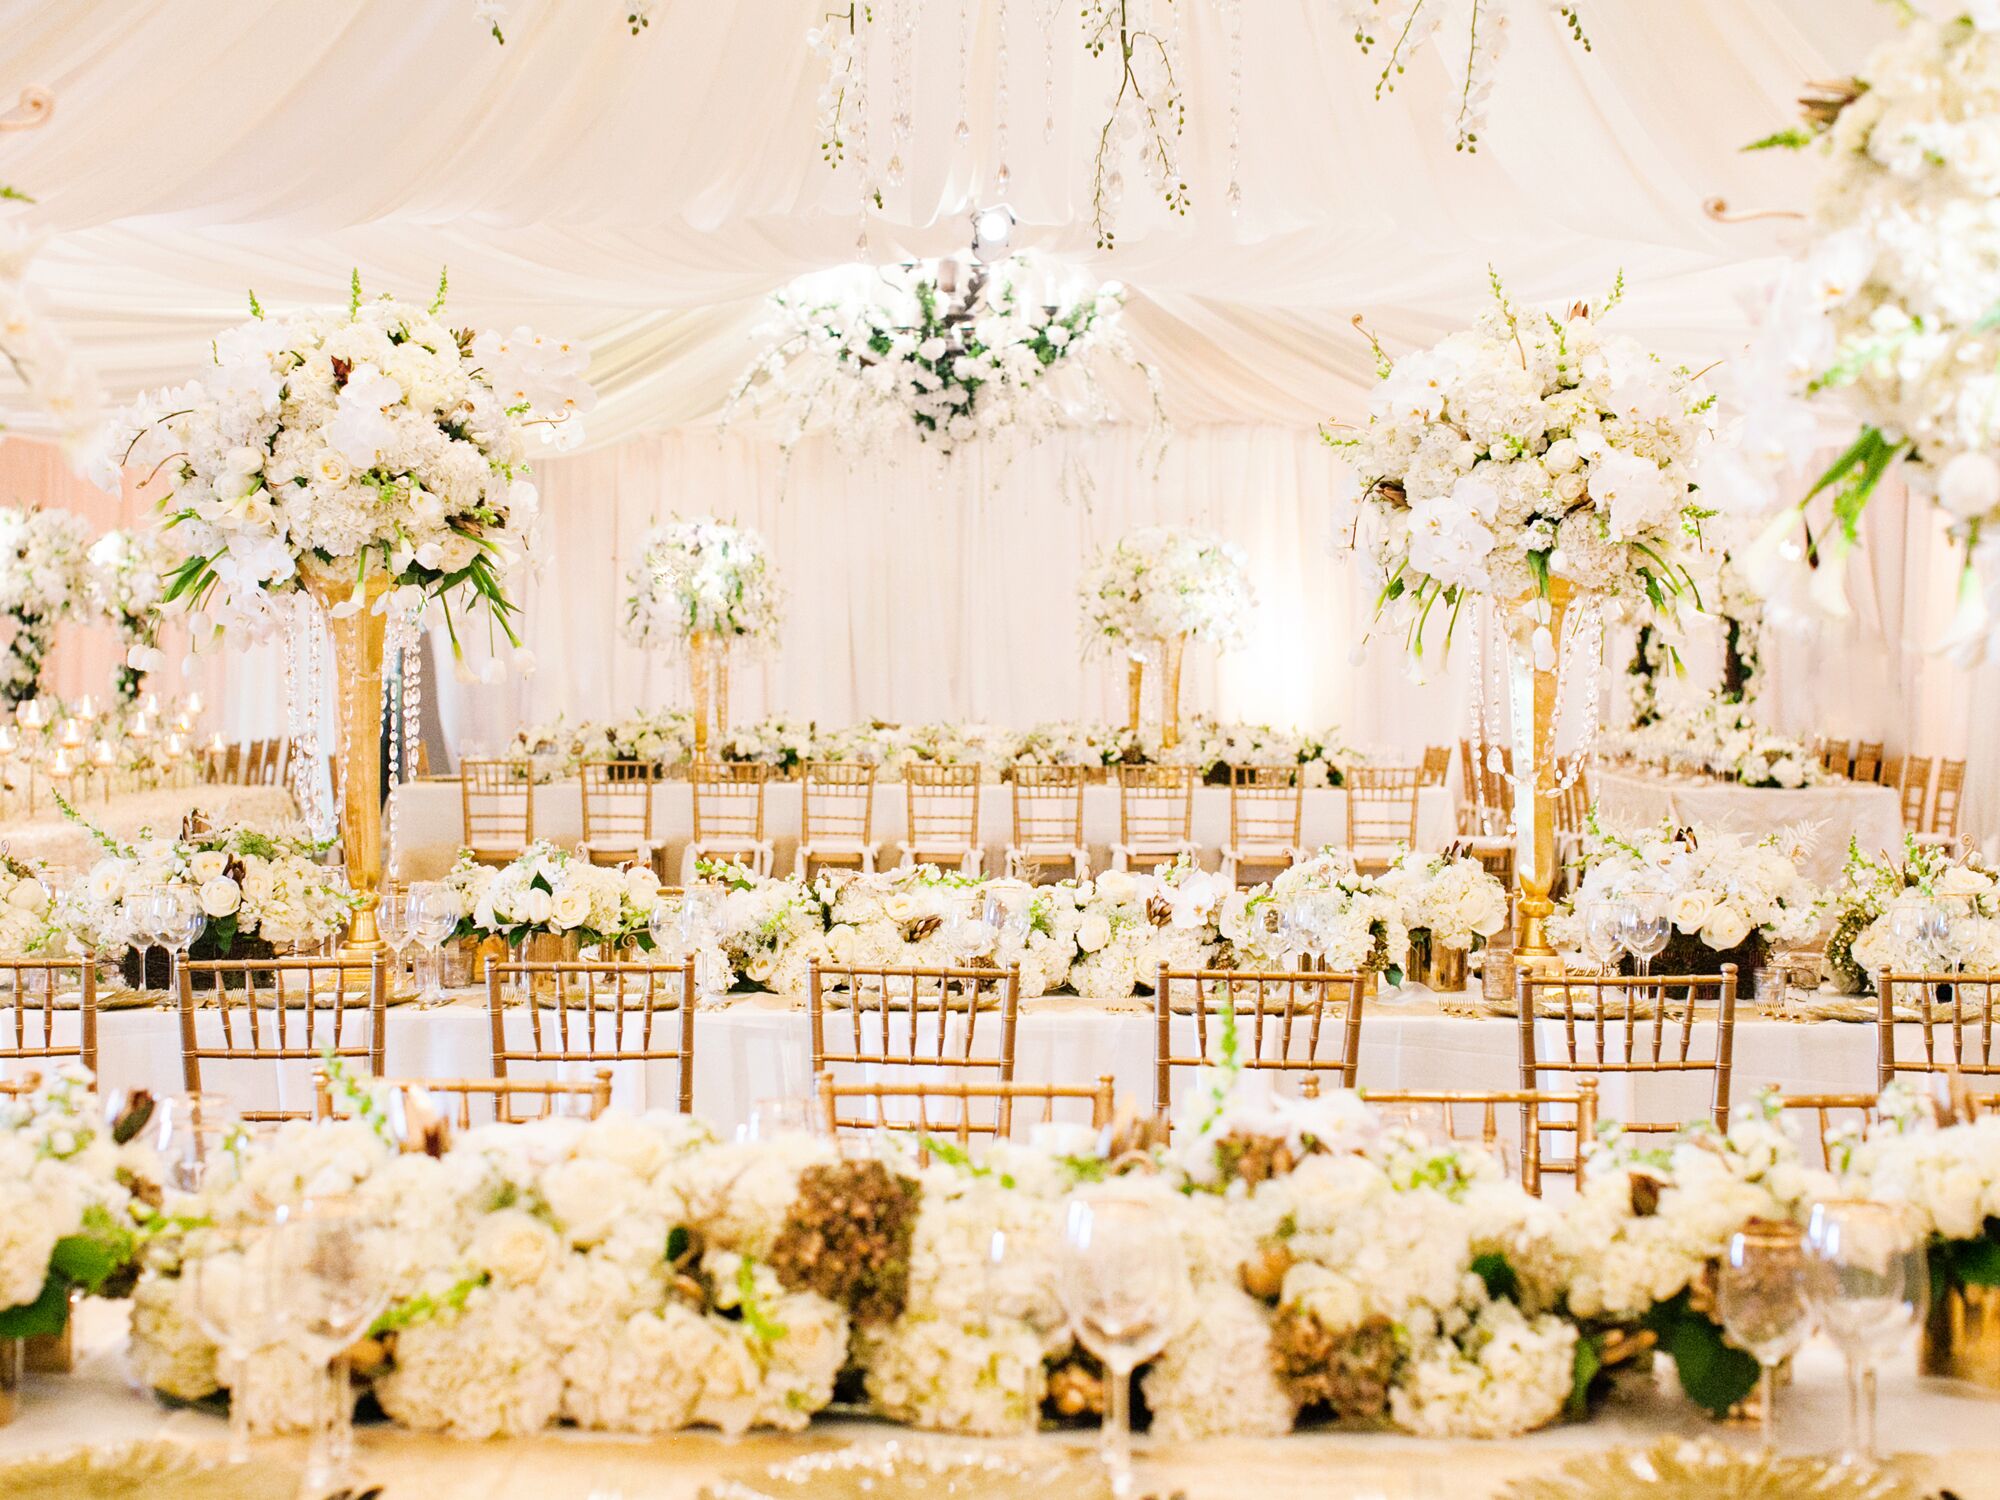 18 of Our Favorite OvertheTop Wedding Ideas